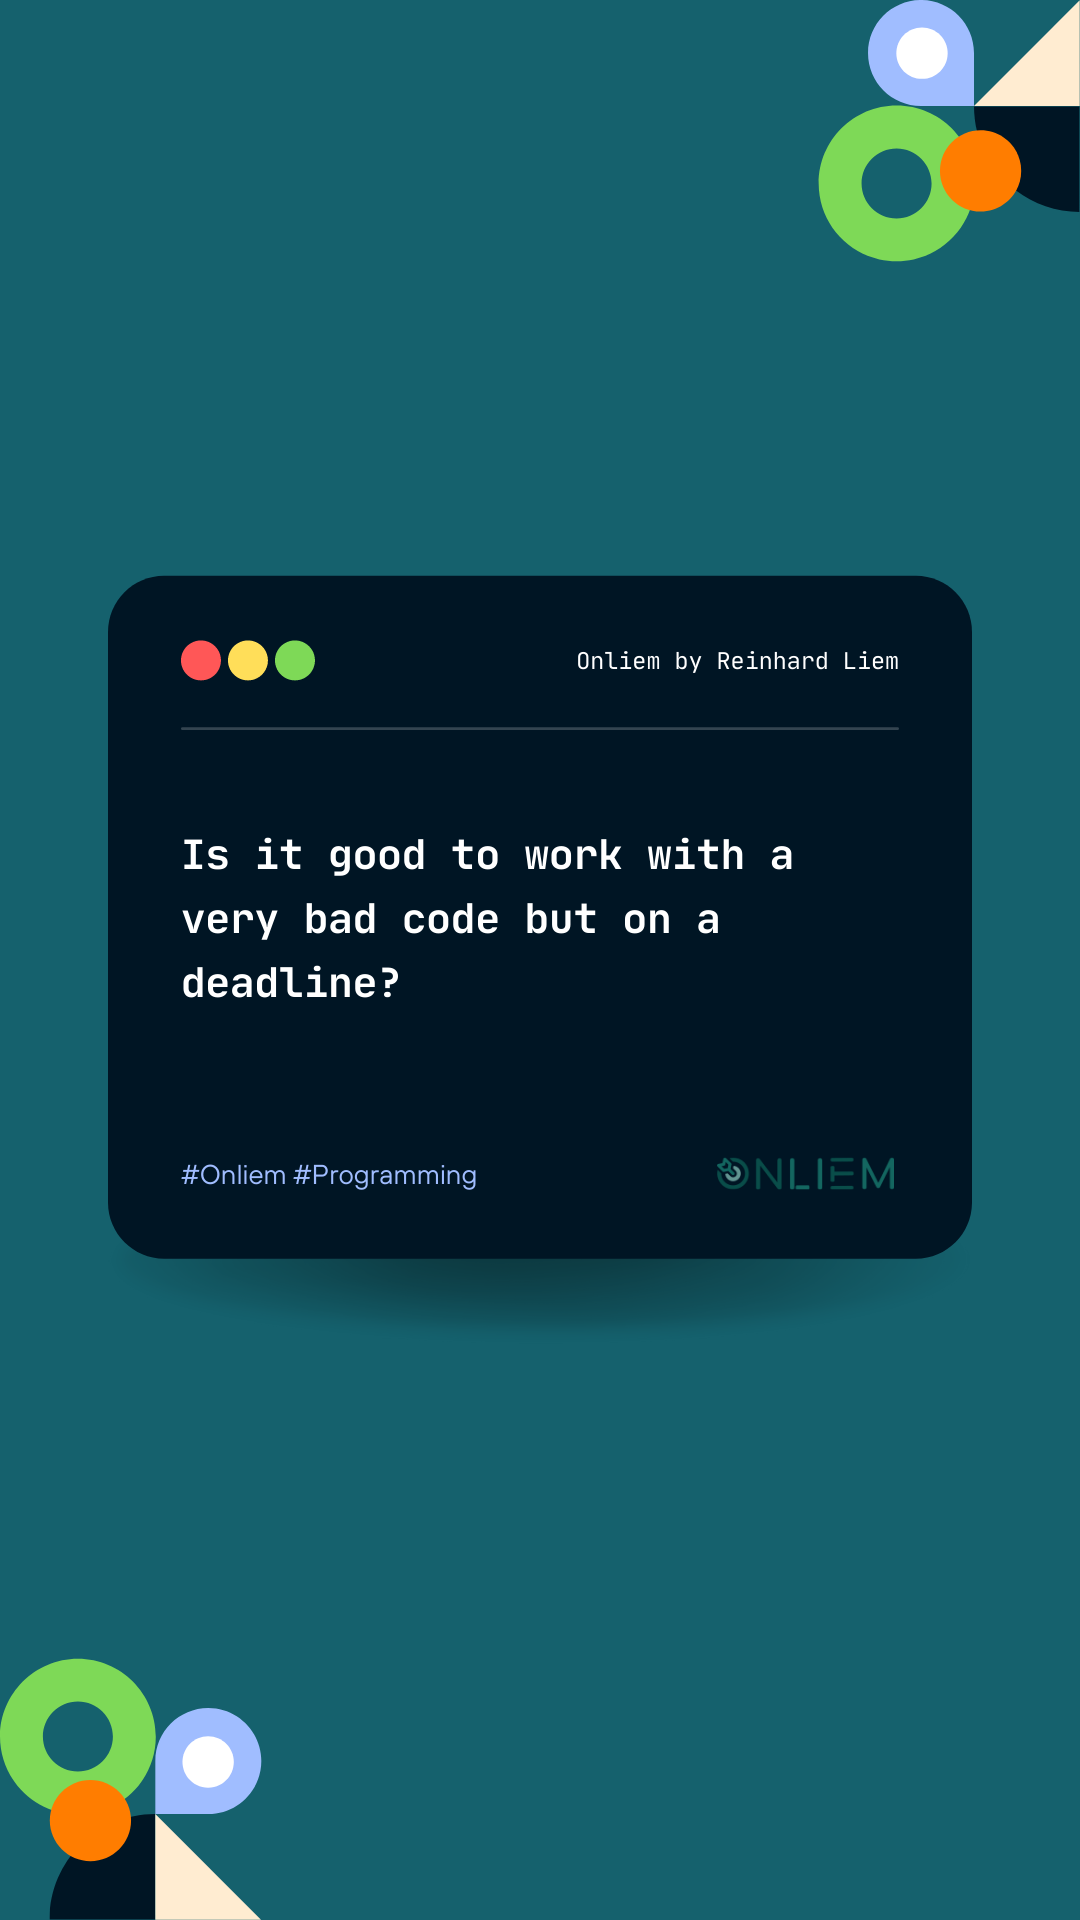 Onliem by Reinhard Liem | Is it good to work with a very bad code but on a deadline?